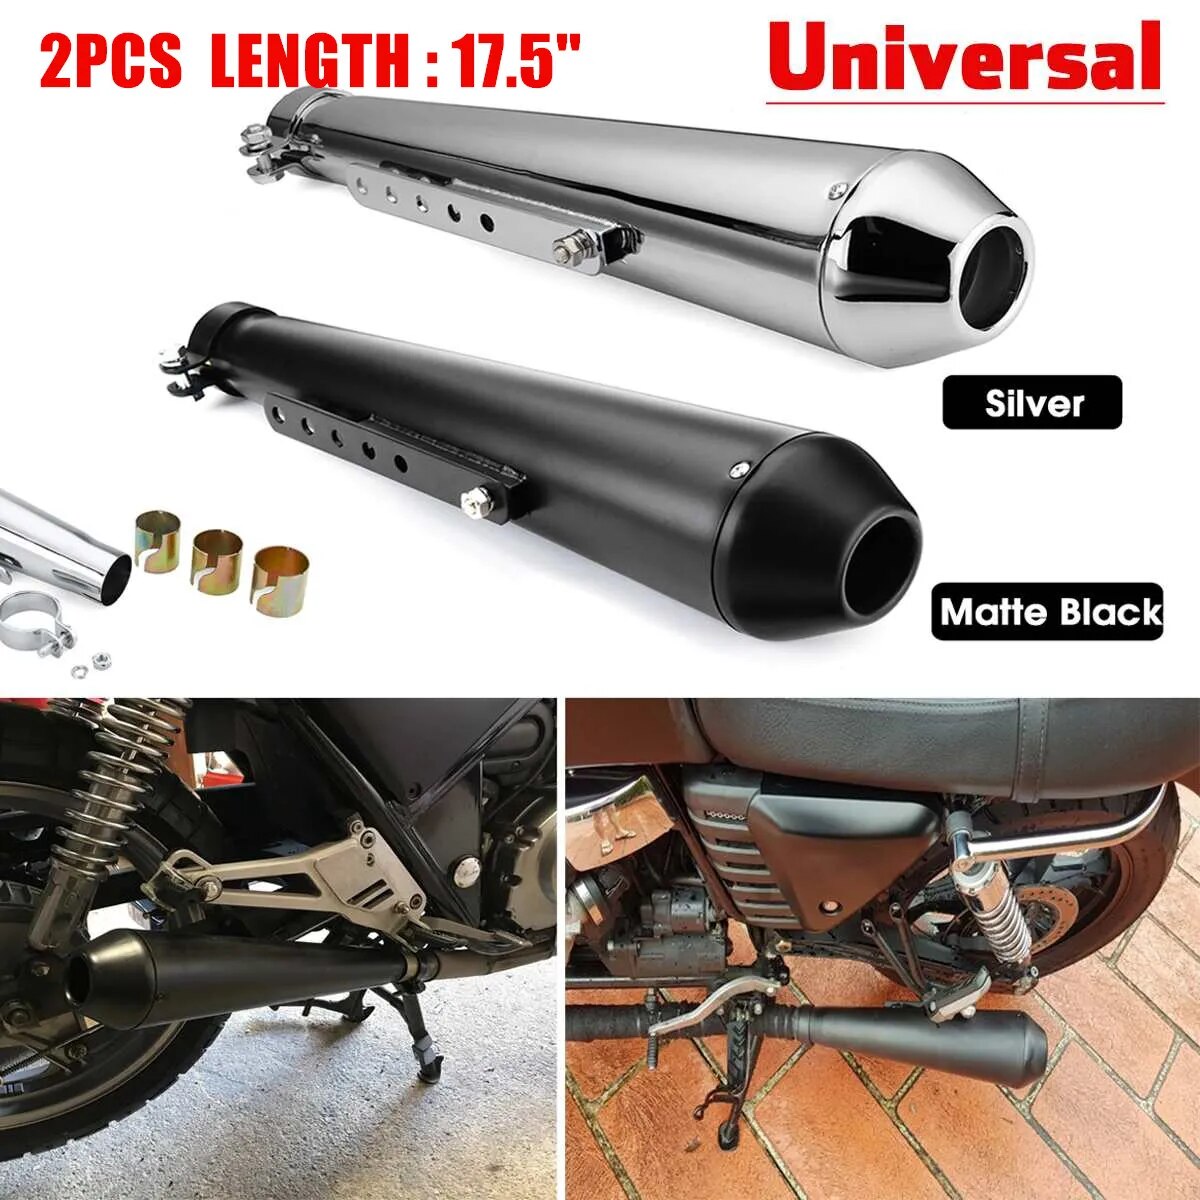 2pc Universal Motorcycle Exhaust Pipe Cafe Racer Modified Tail Exhaust System with Sliding Bracket Matte For Honda/Yamaha/Suzuki